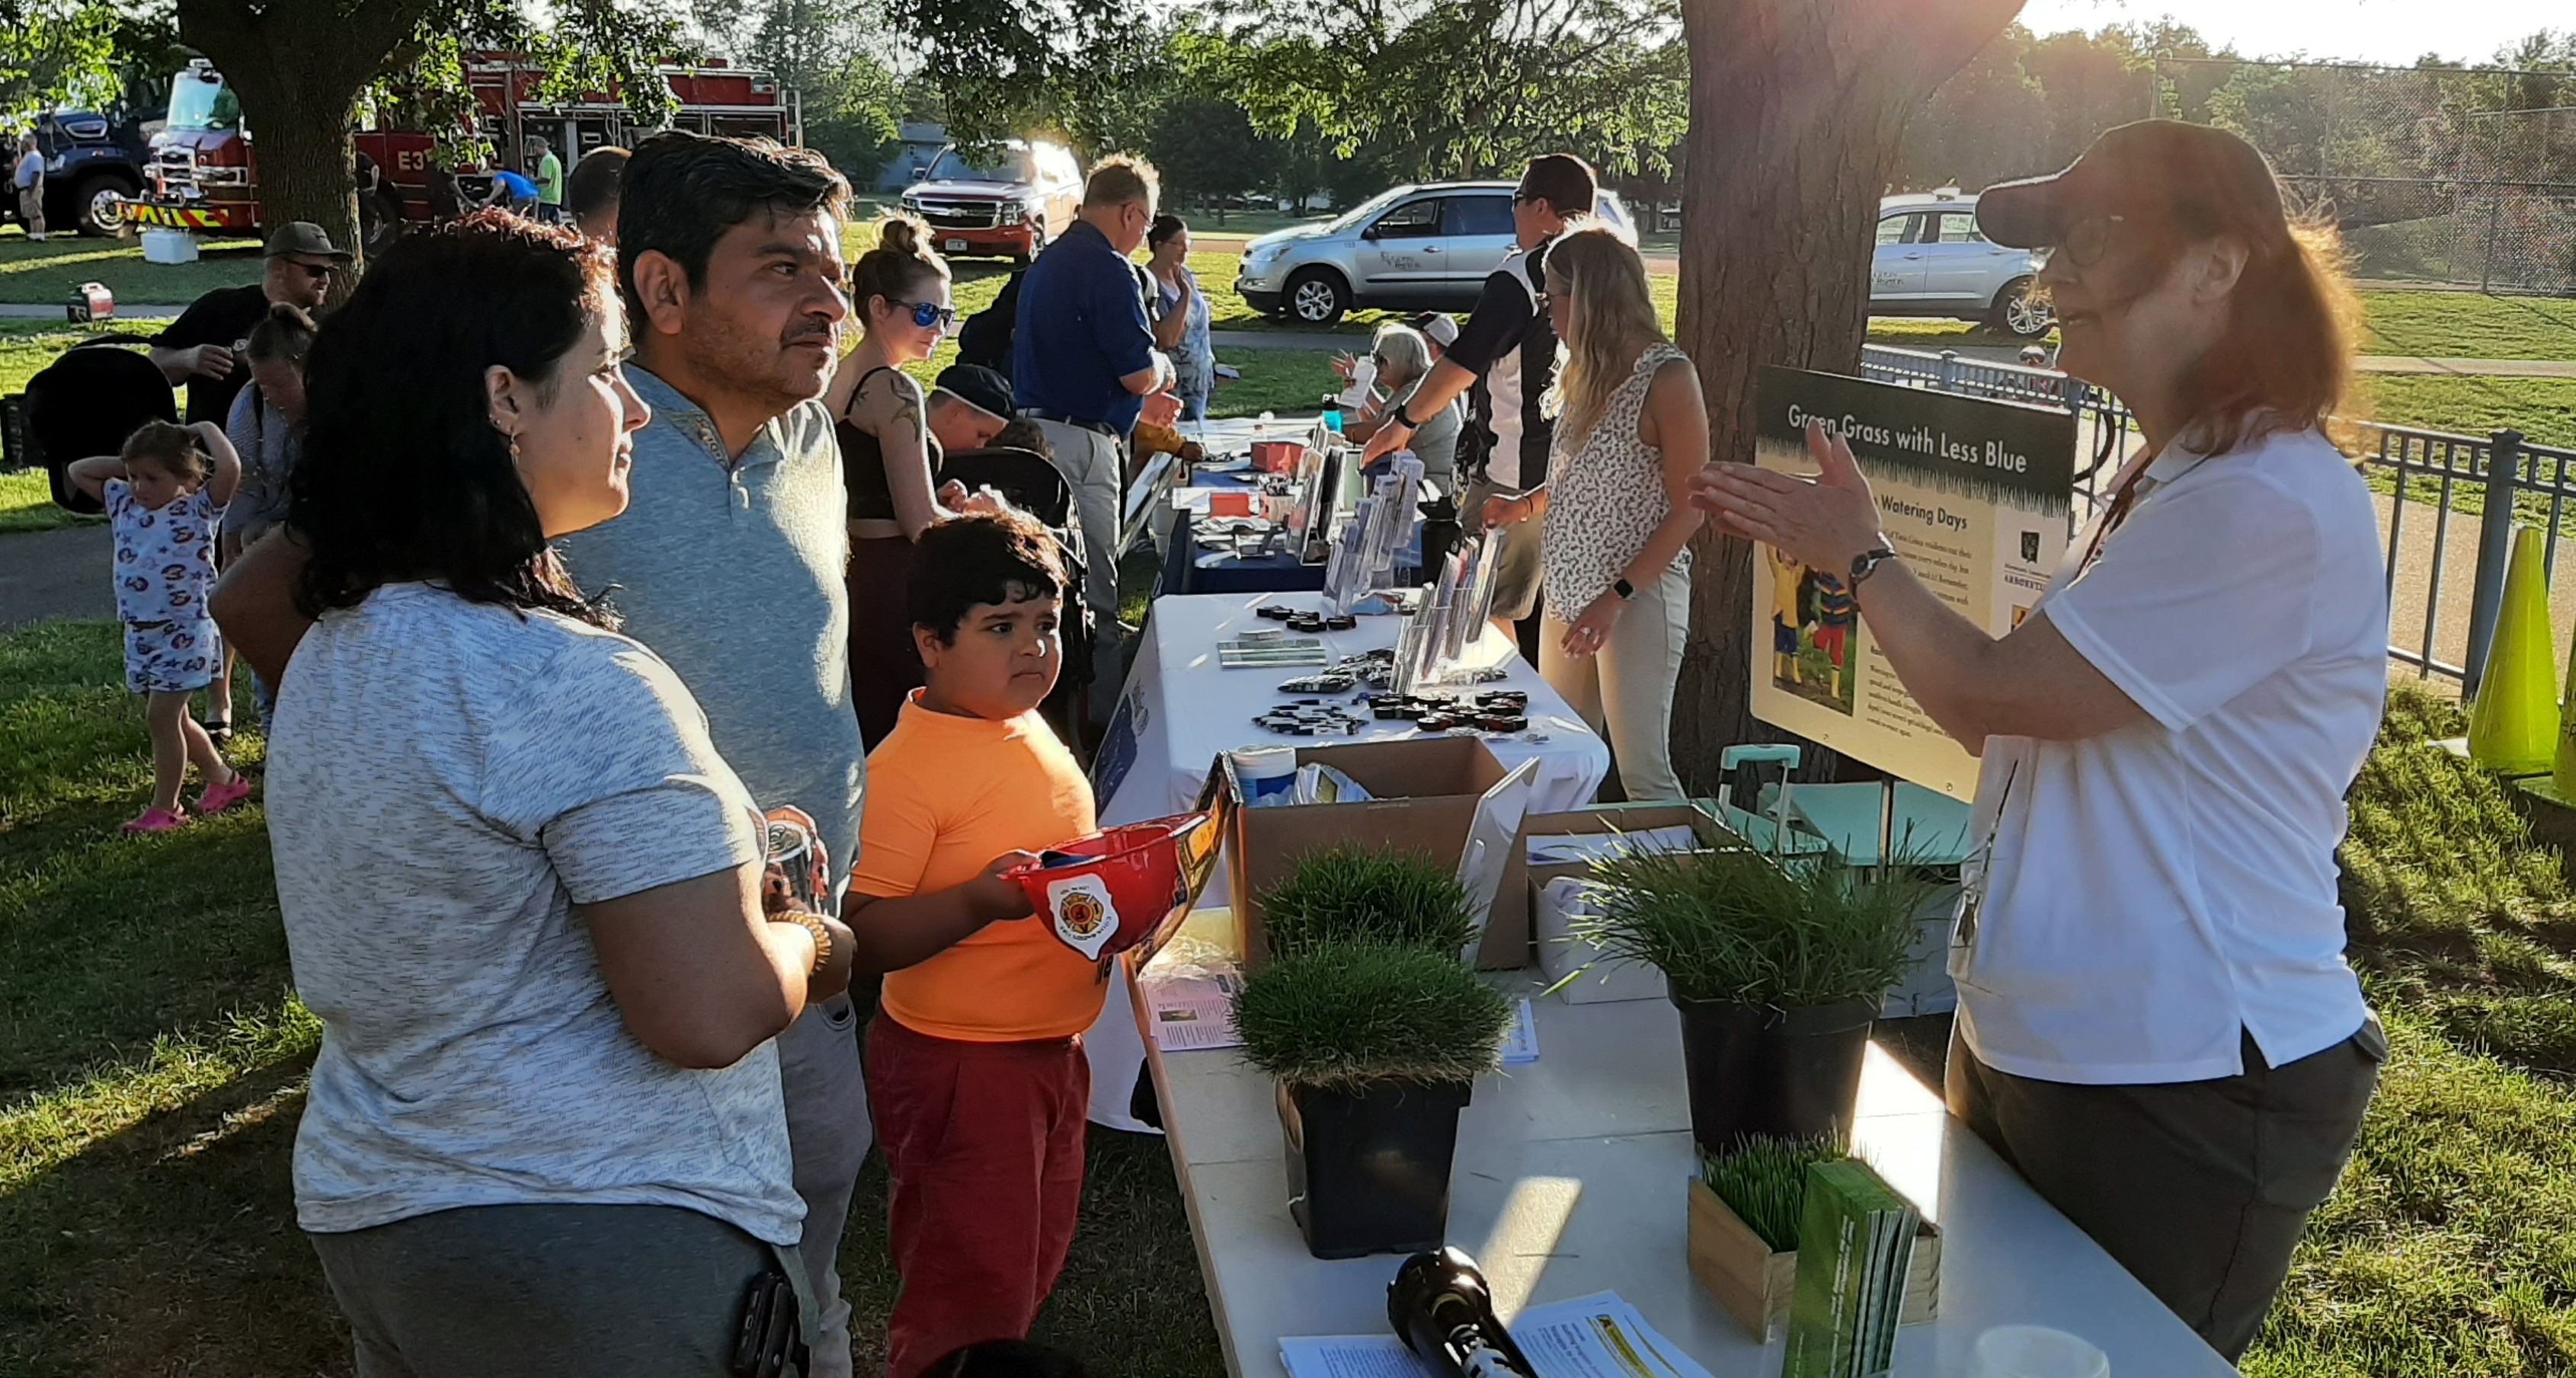 a person discussing lawn care with a family at an outdoor event